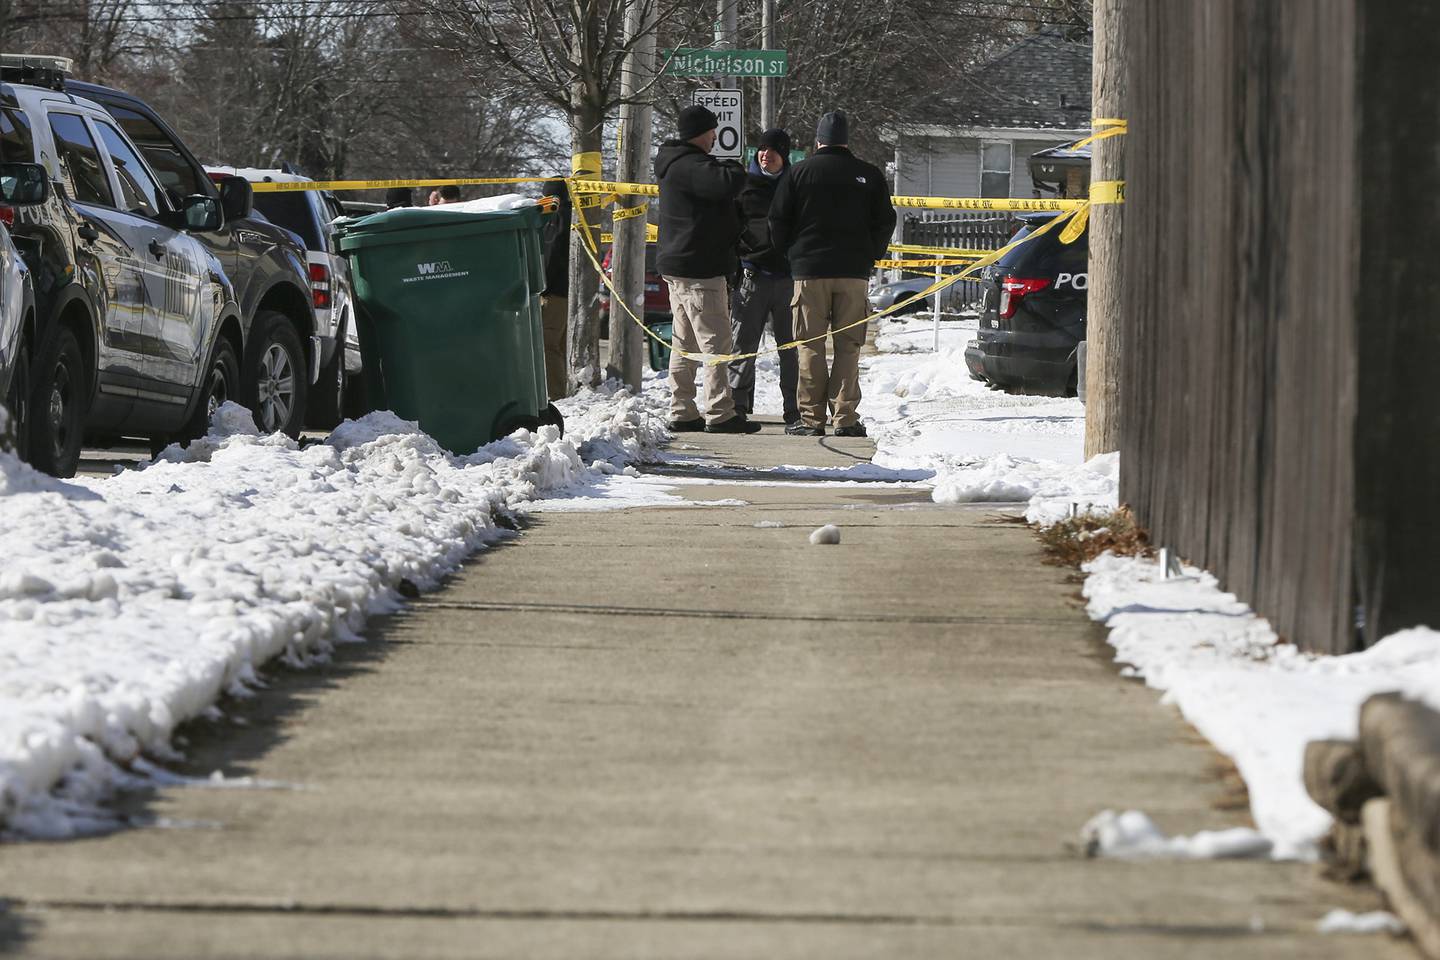 Police gather at the intersection of Ingalls Ave. and Nicholson St. after an officer involved shooting that took place on Thursday, Jan. 28, 2021, in Joliet, Ill.